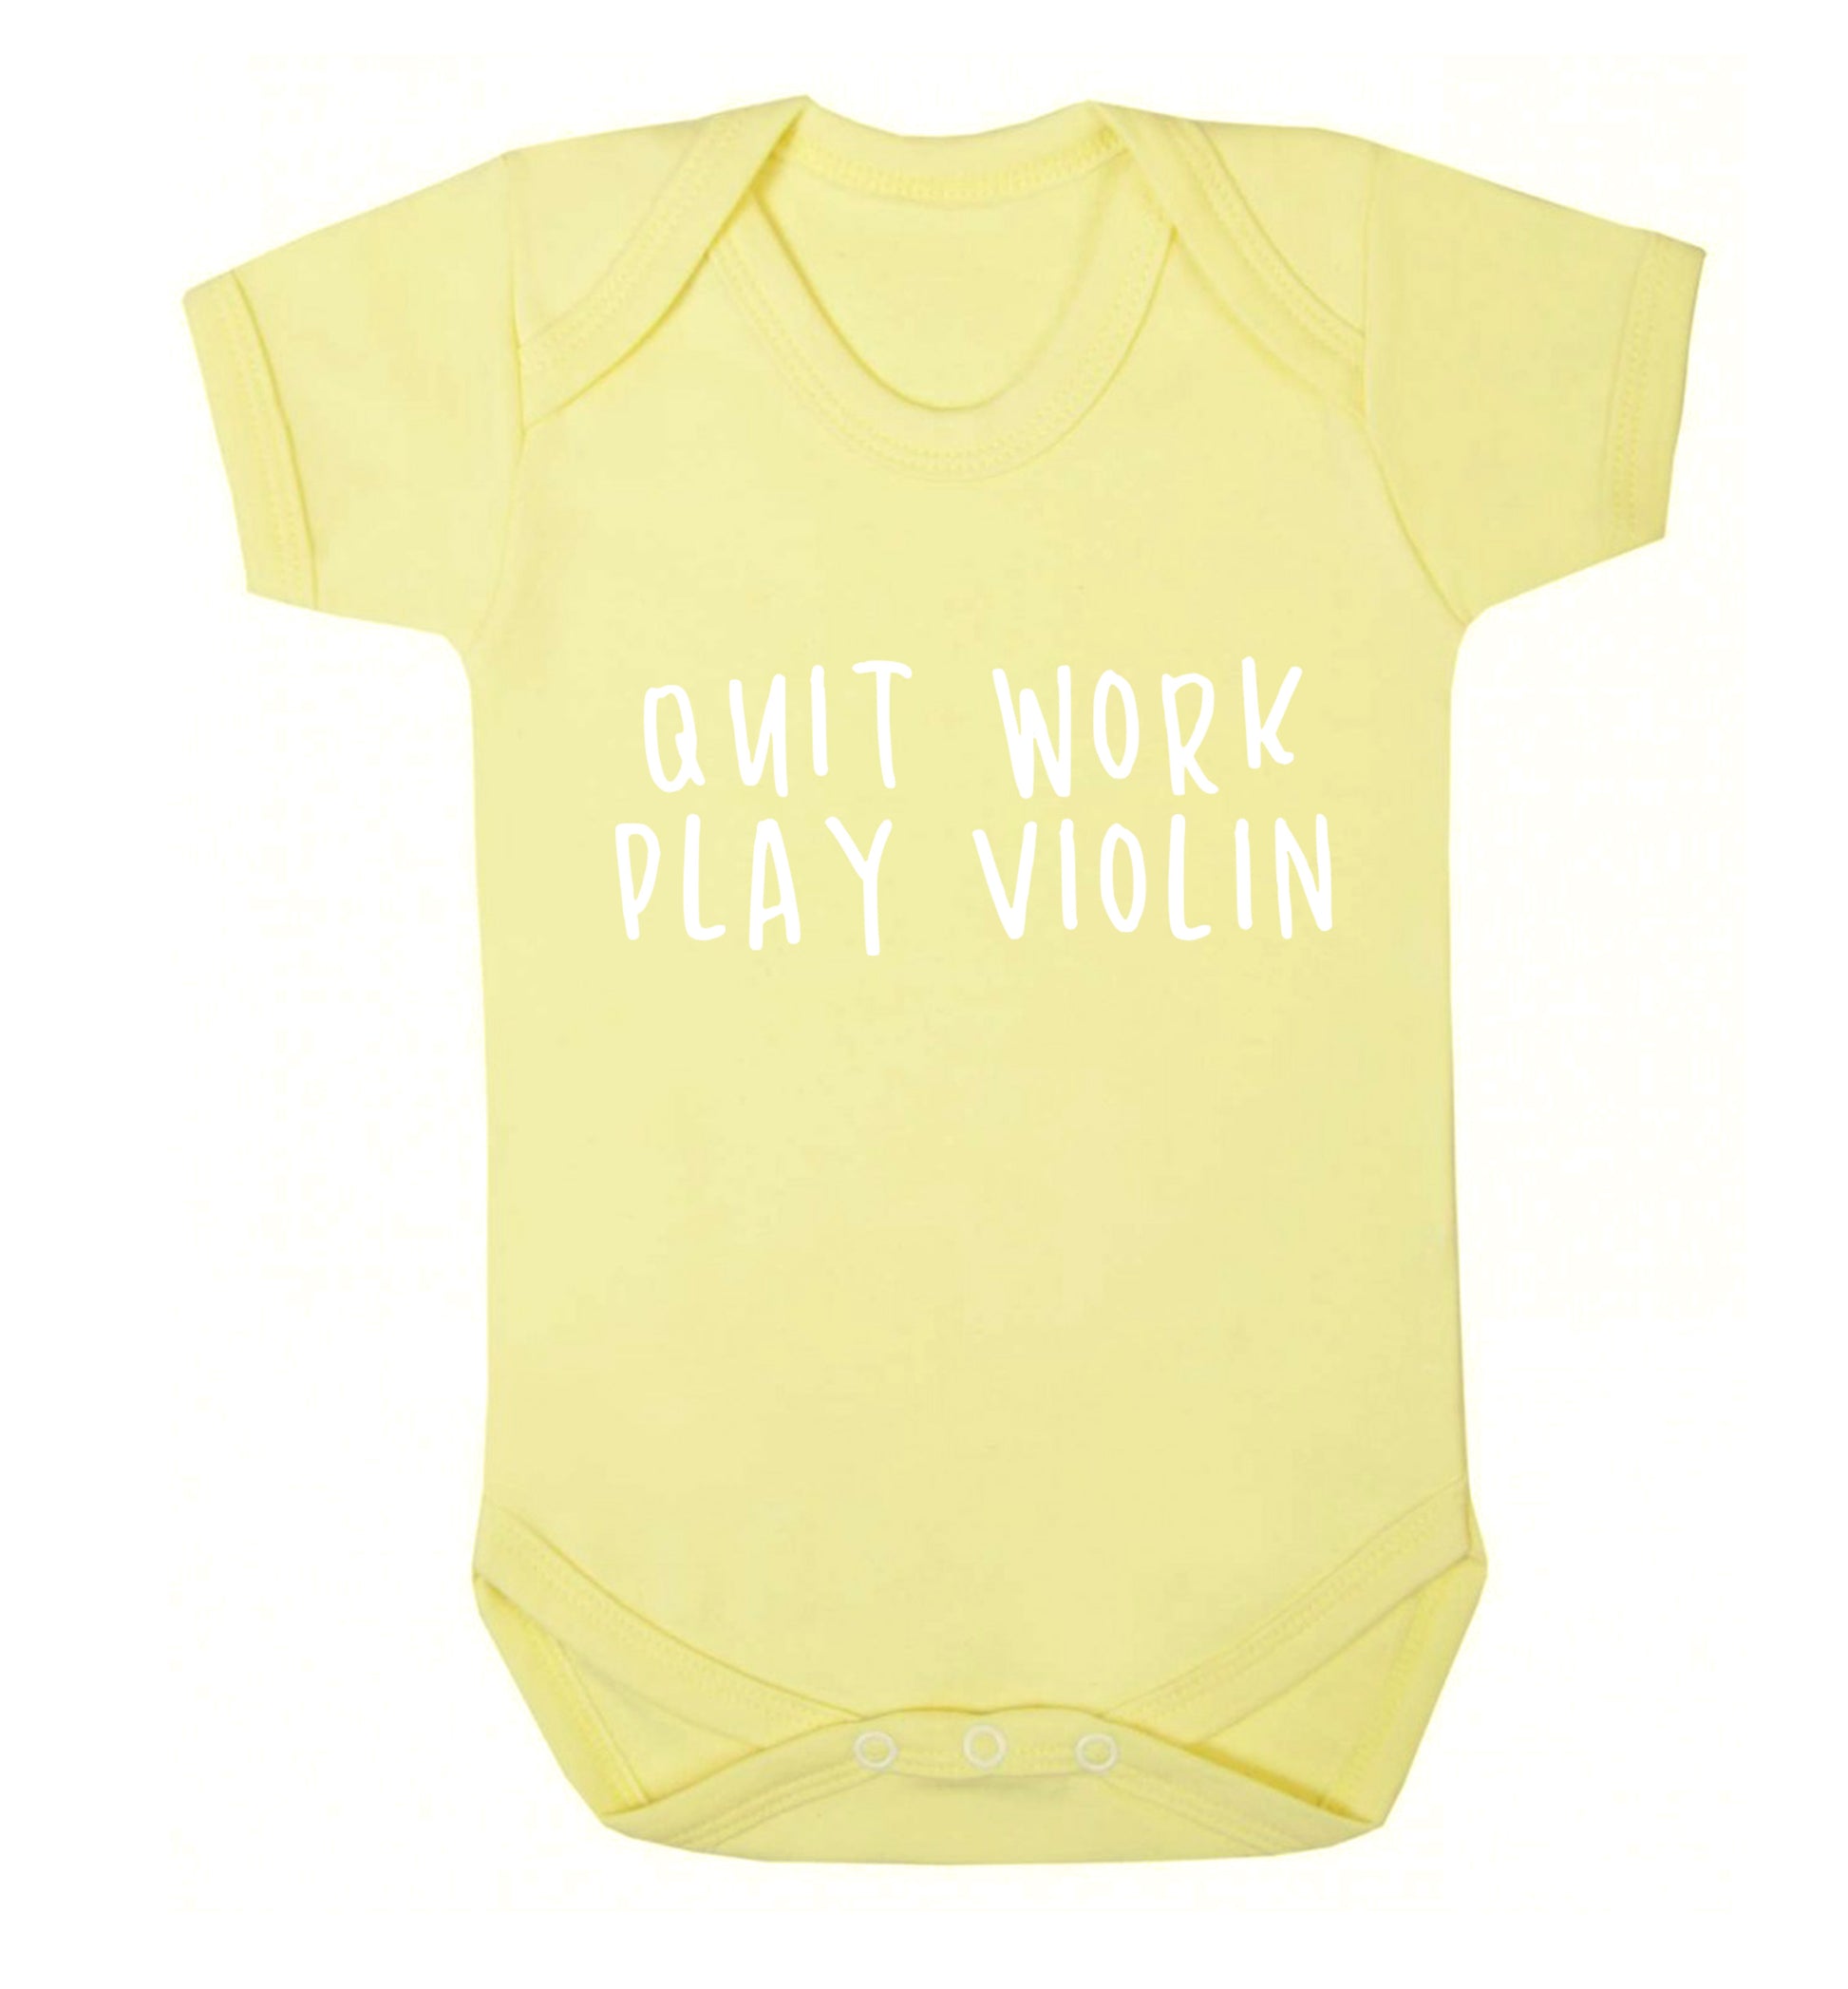 Quit work play violin Baby Vest pale yellow 18-24 months